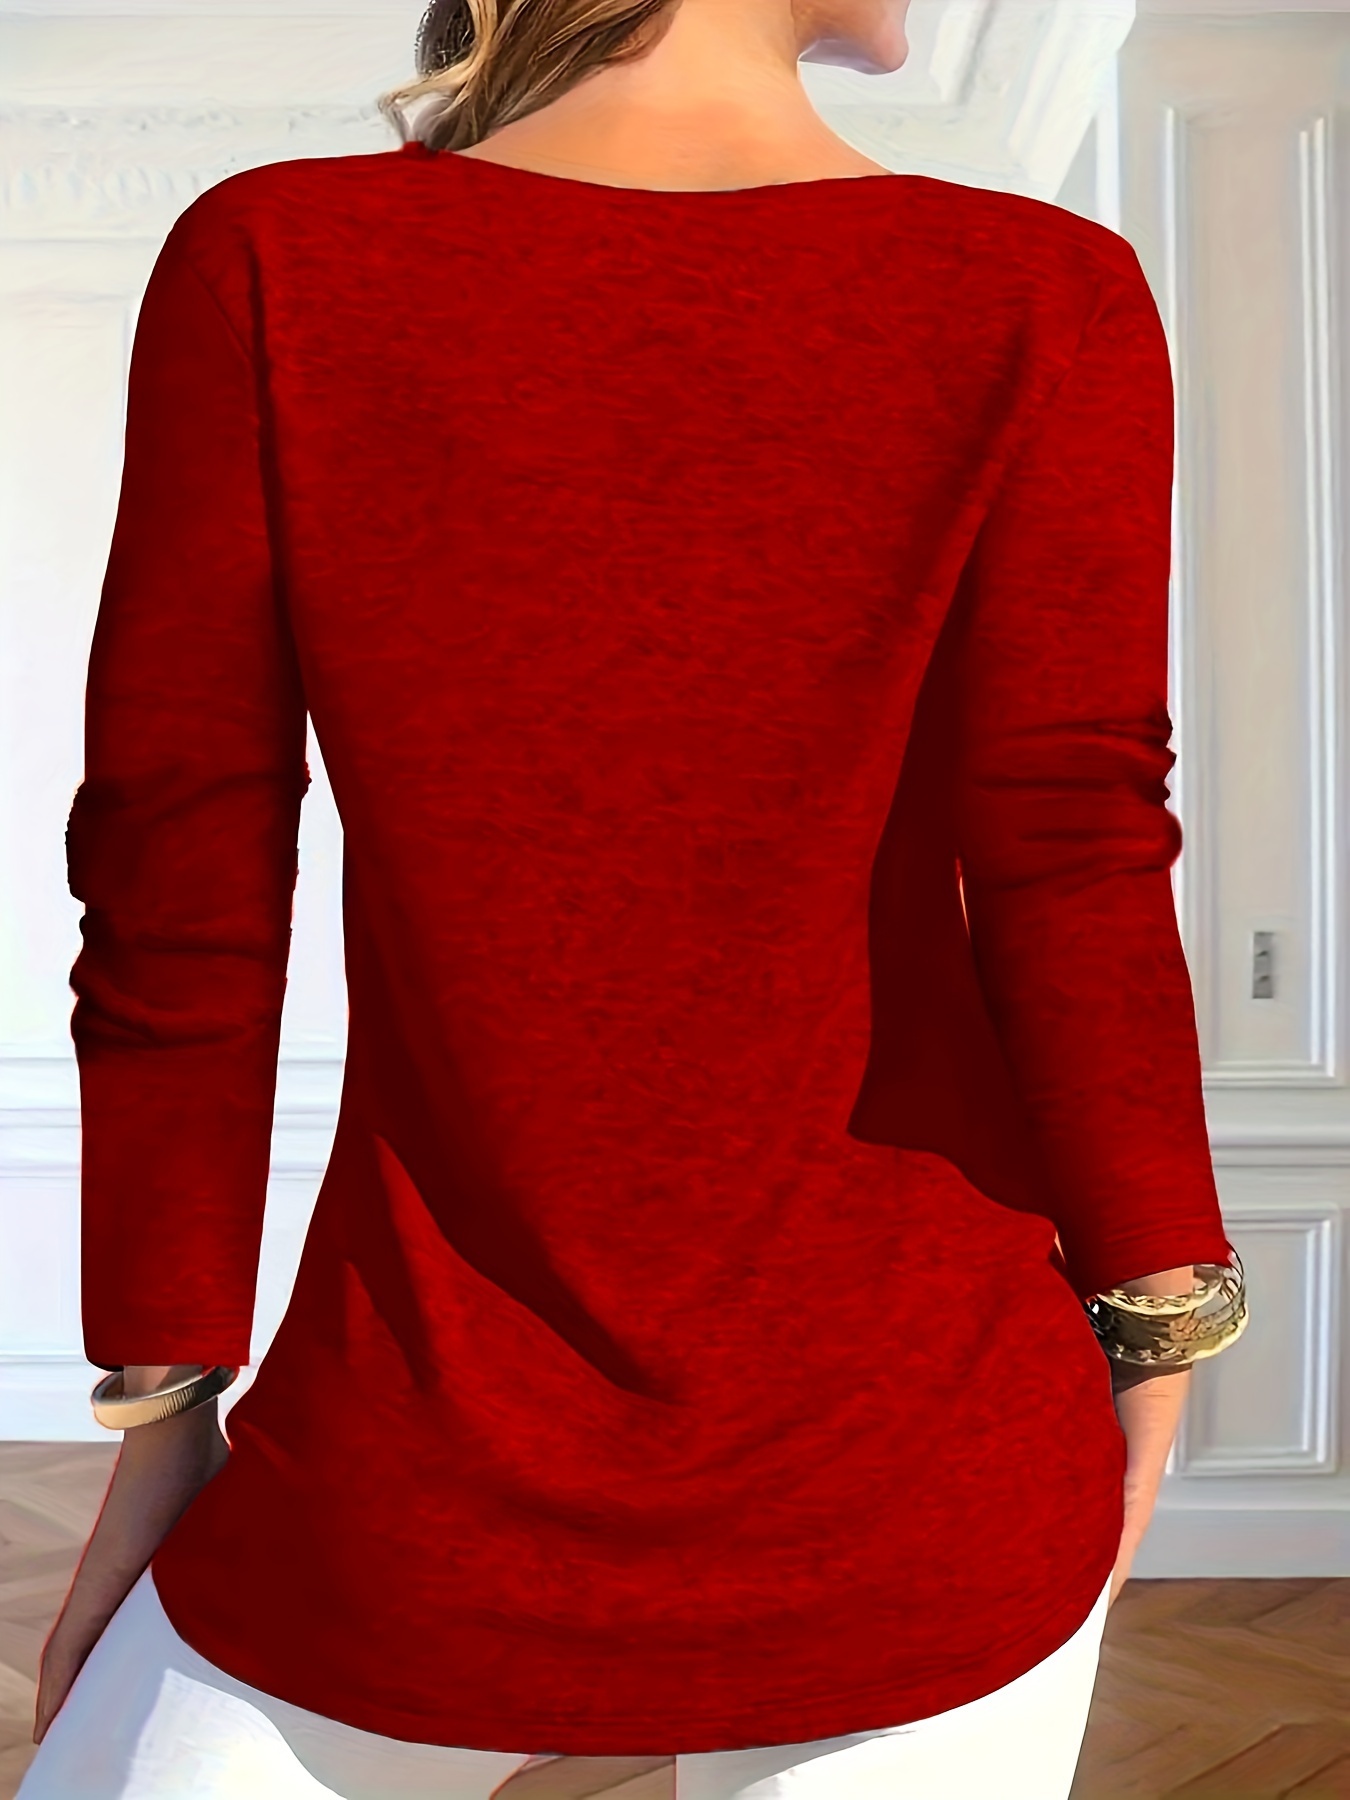 YWDJ Womens Sweaters Plus Size Fashion Women Solid Long Sleeve Pullove  Square-Neck Casual Sweater Tops Red L 